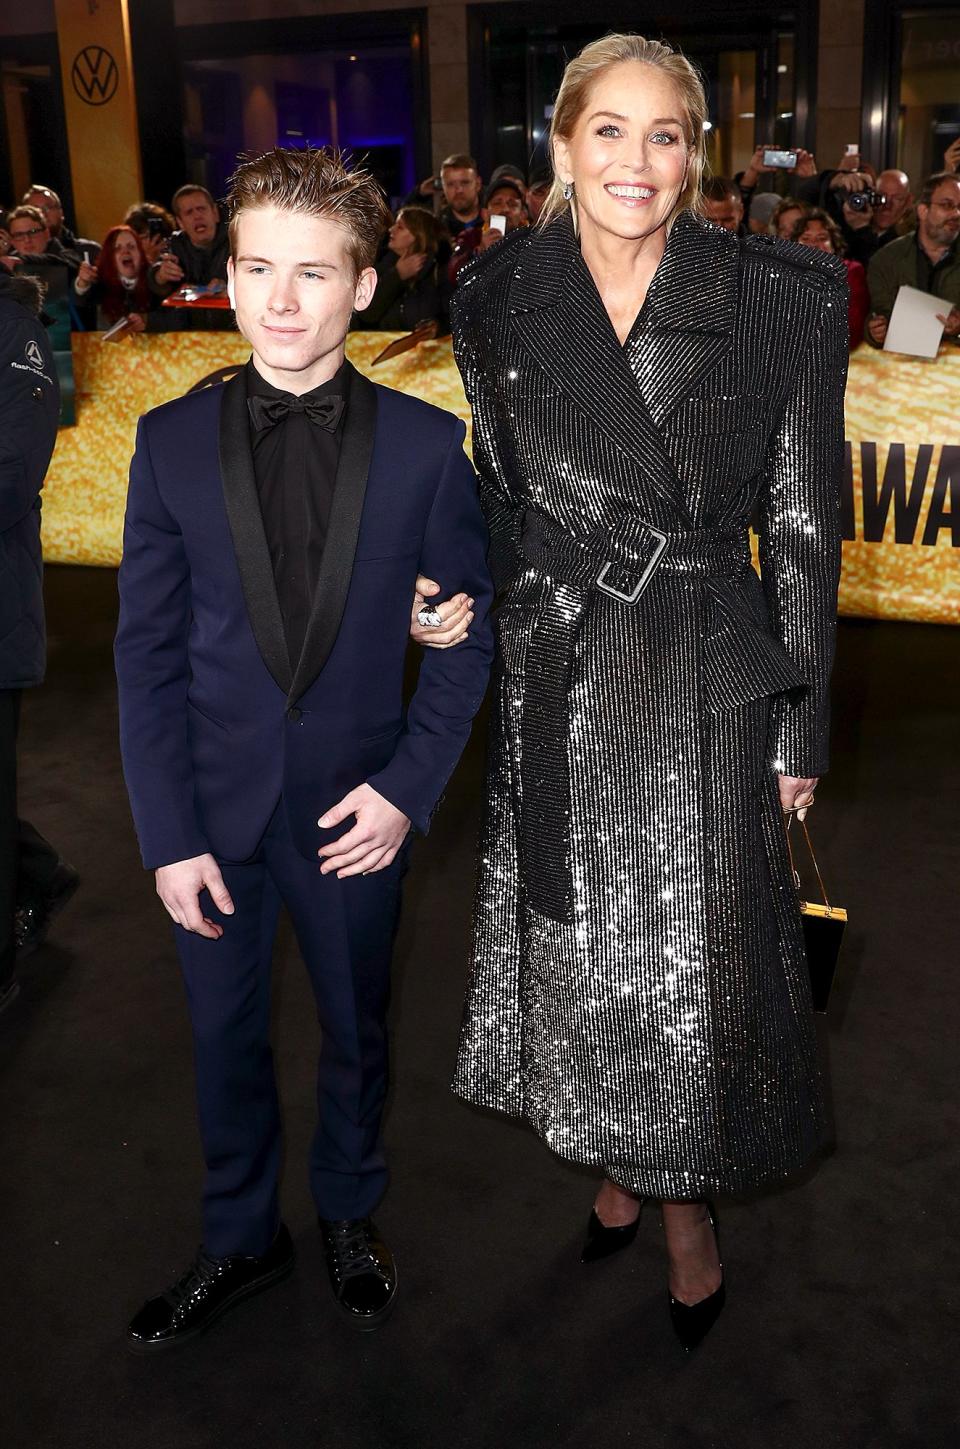 Sharon Stone and her son Roan Bronstein arrive for the 21st <em>GQ</em> Men of the Year Awards at Komische Oper Berlin in Germany on Thursday.